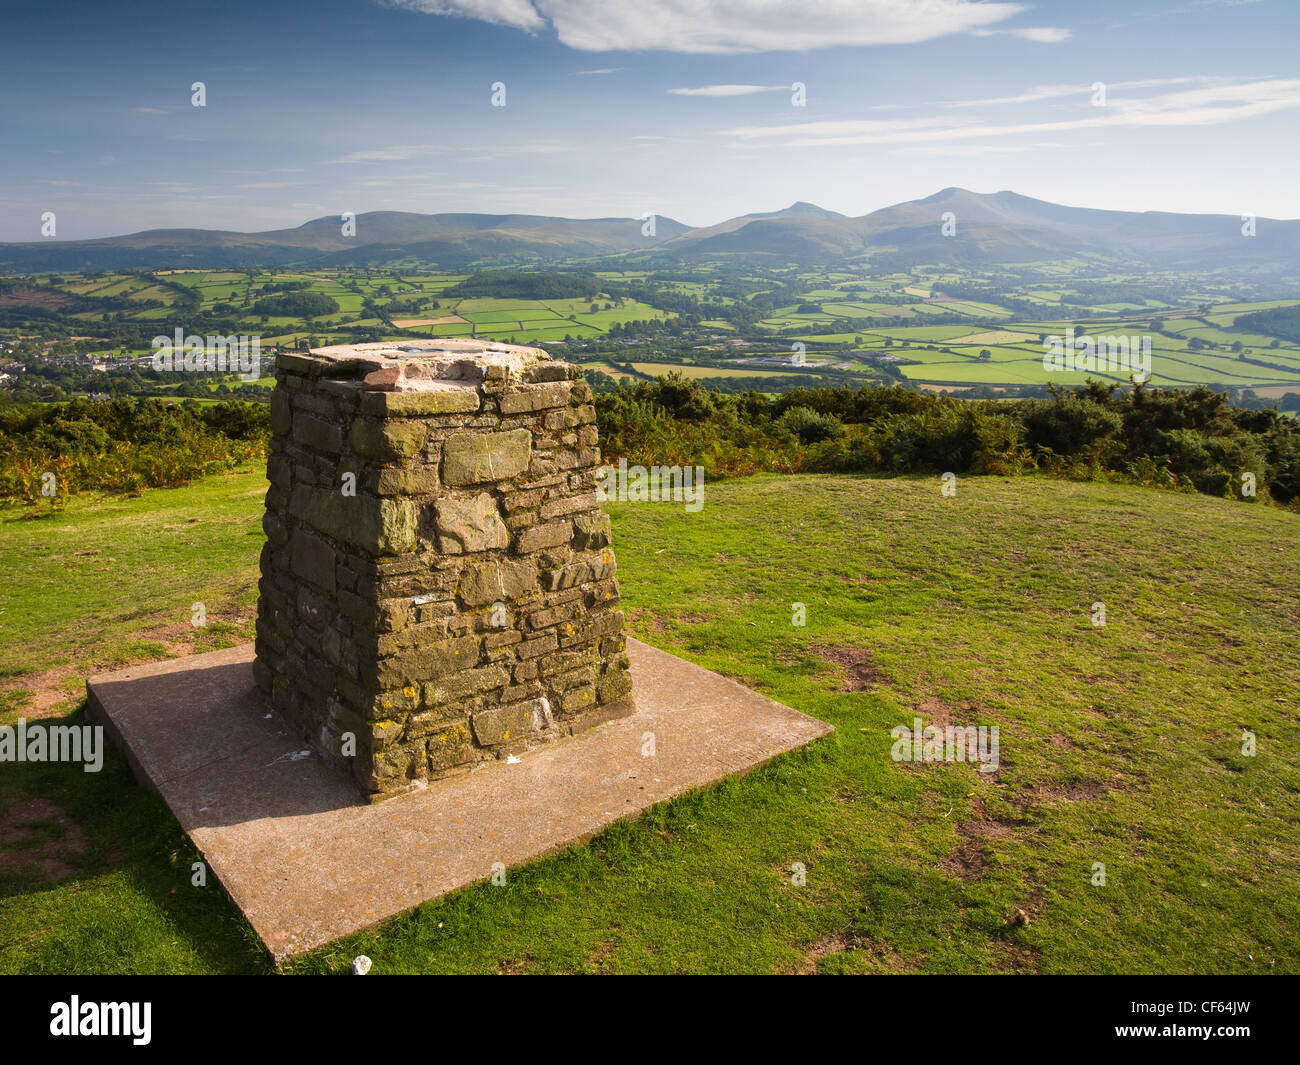 Trig point on top of Pen-y-Crug hillfort overlooking Brecon and the Usk valley in the Brecon Beacons National Park. Stock Photo